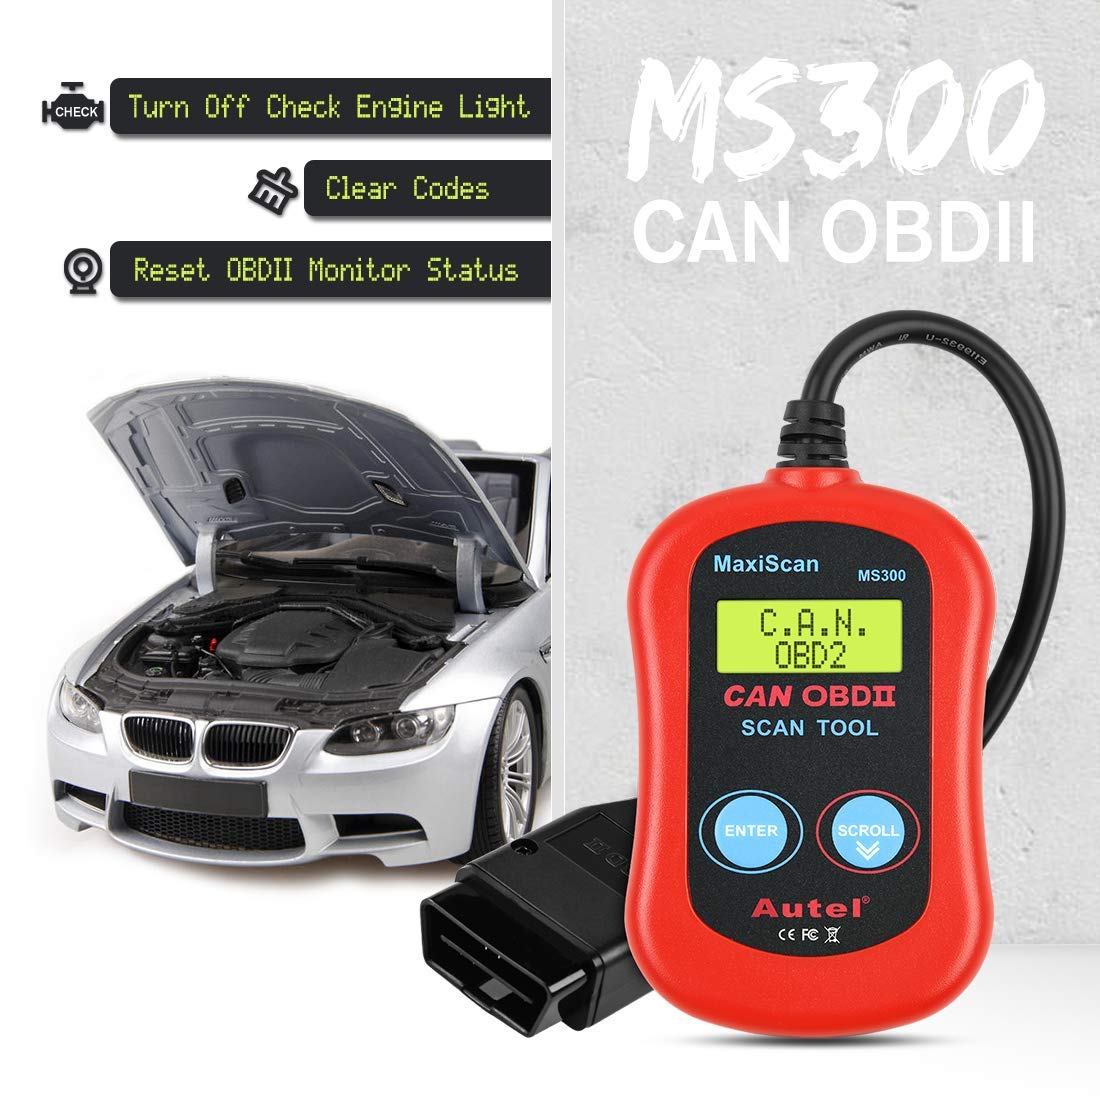 Autel MaxiScan MS300 Car OBD2 Scanner Code Reader Engine Fault Code Reader Scanner CAN Diagnostic Scan Tool for All OBD II Protocol Cars Since 1996, Red